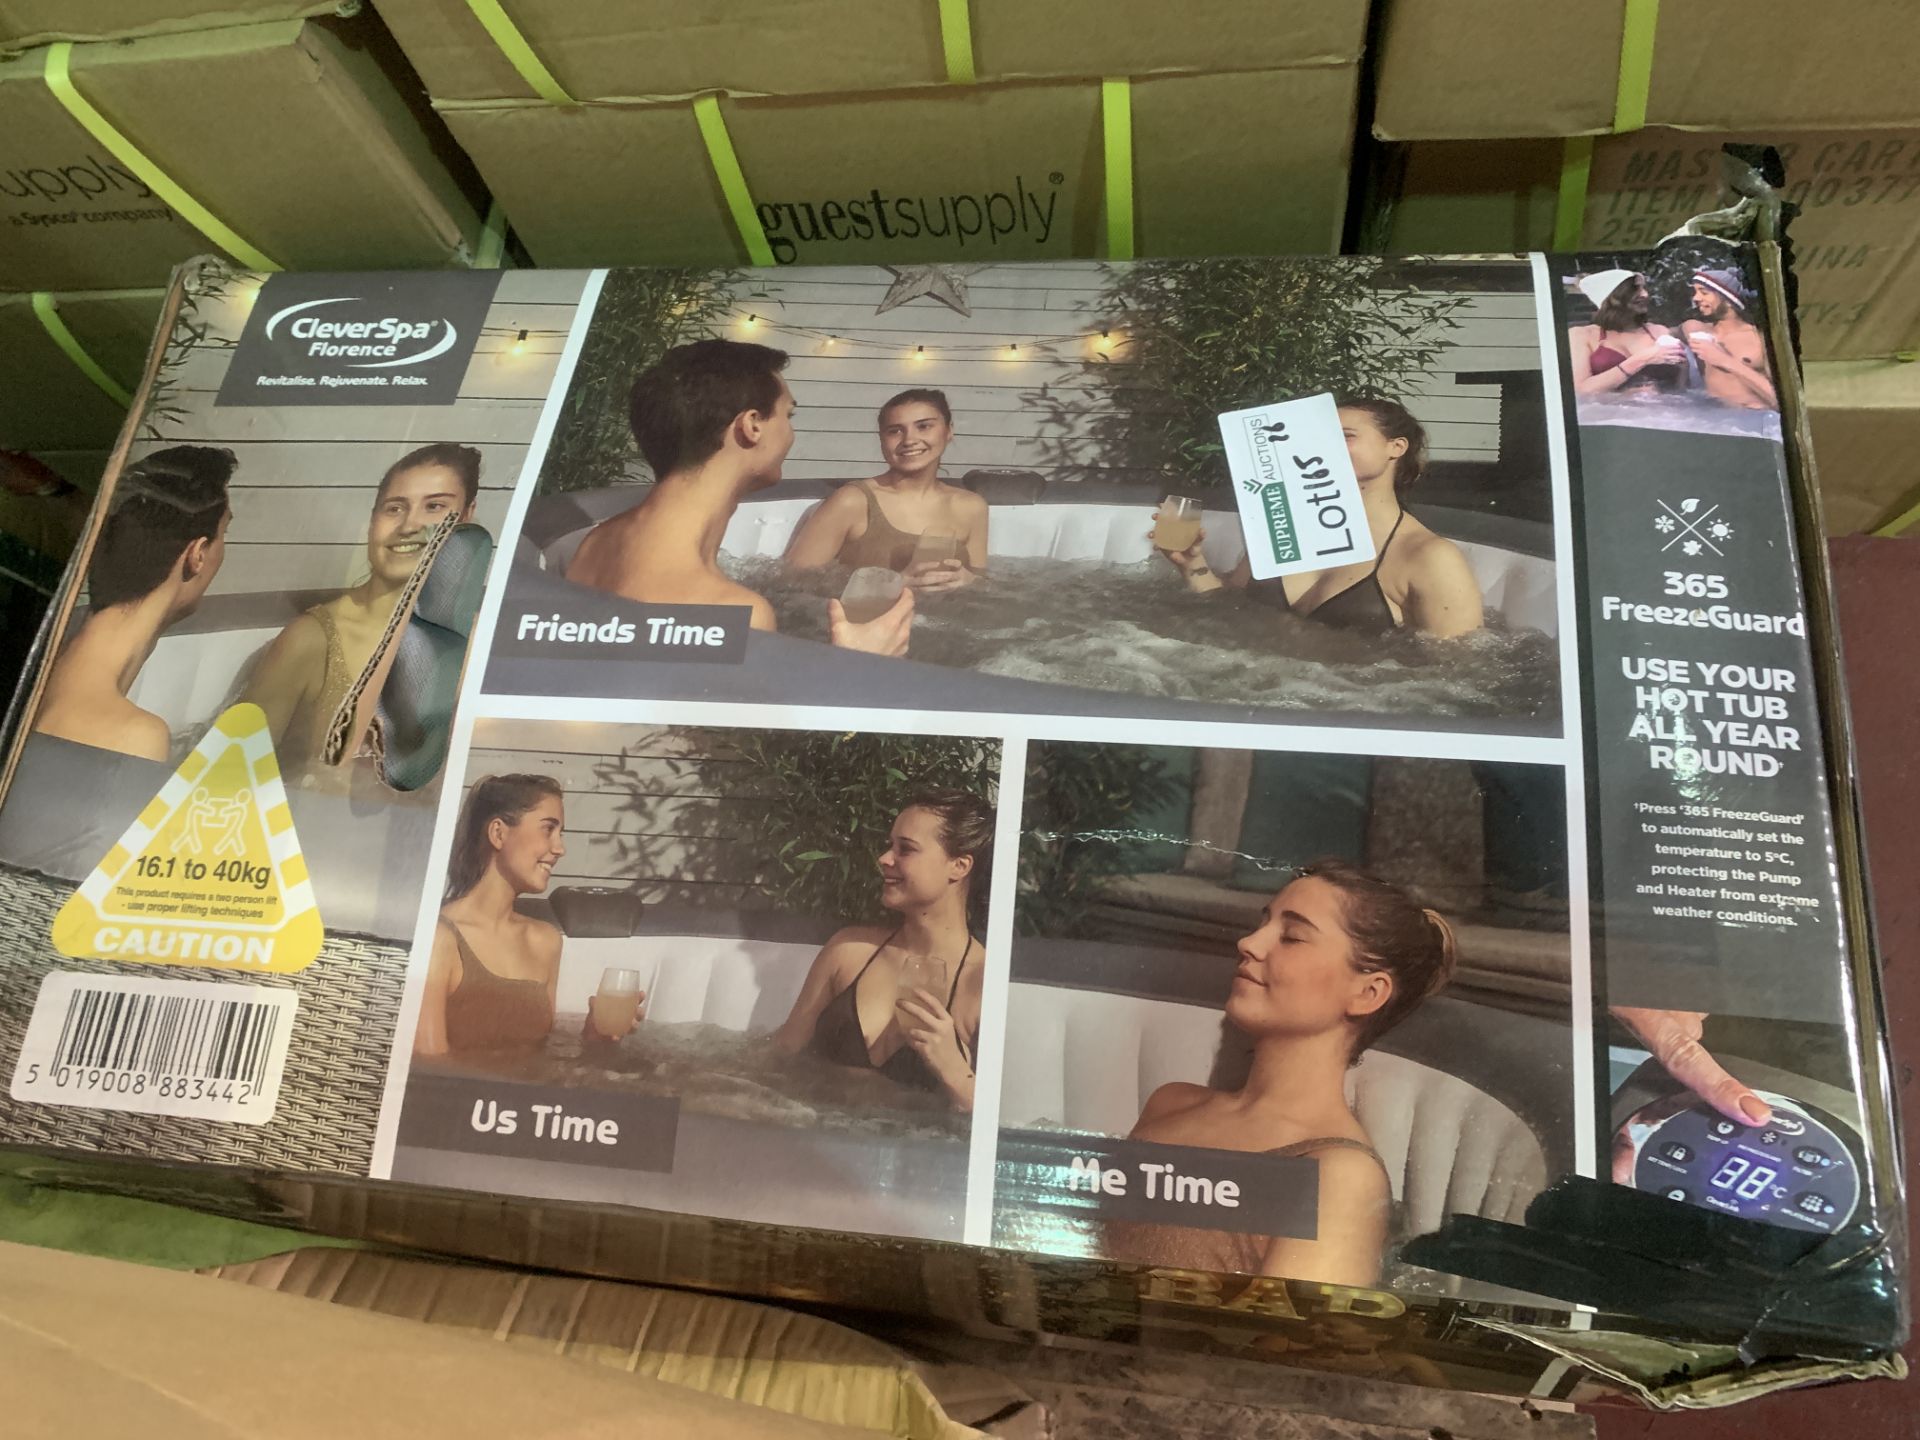 BOXED CLEVERSPA FLORENCE 6 PERSON HOT TUB (UNCHECKED, UNTESTED)